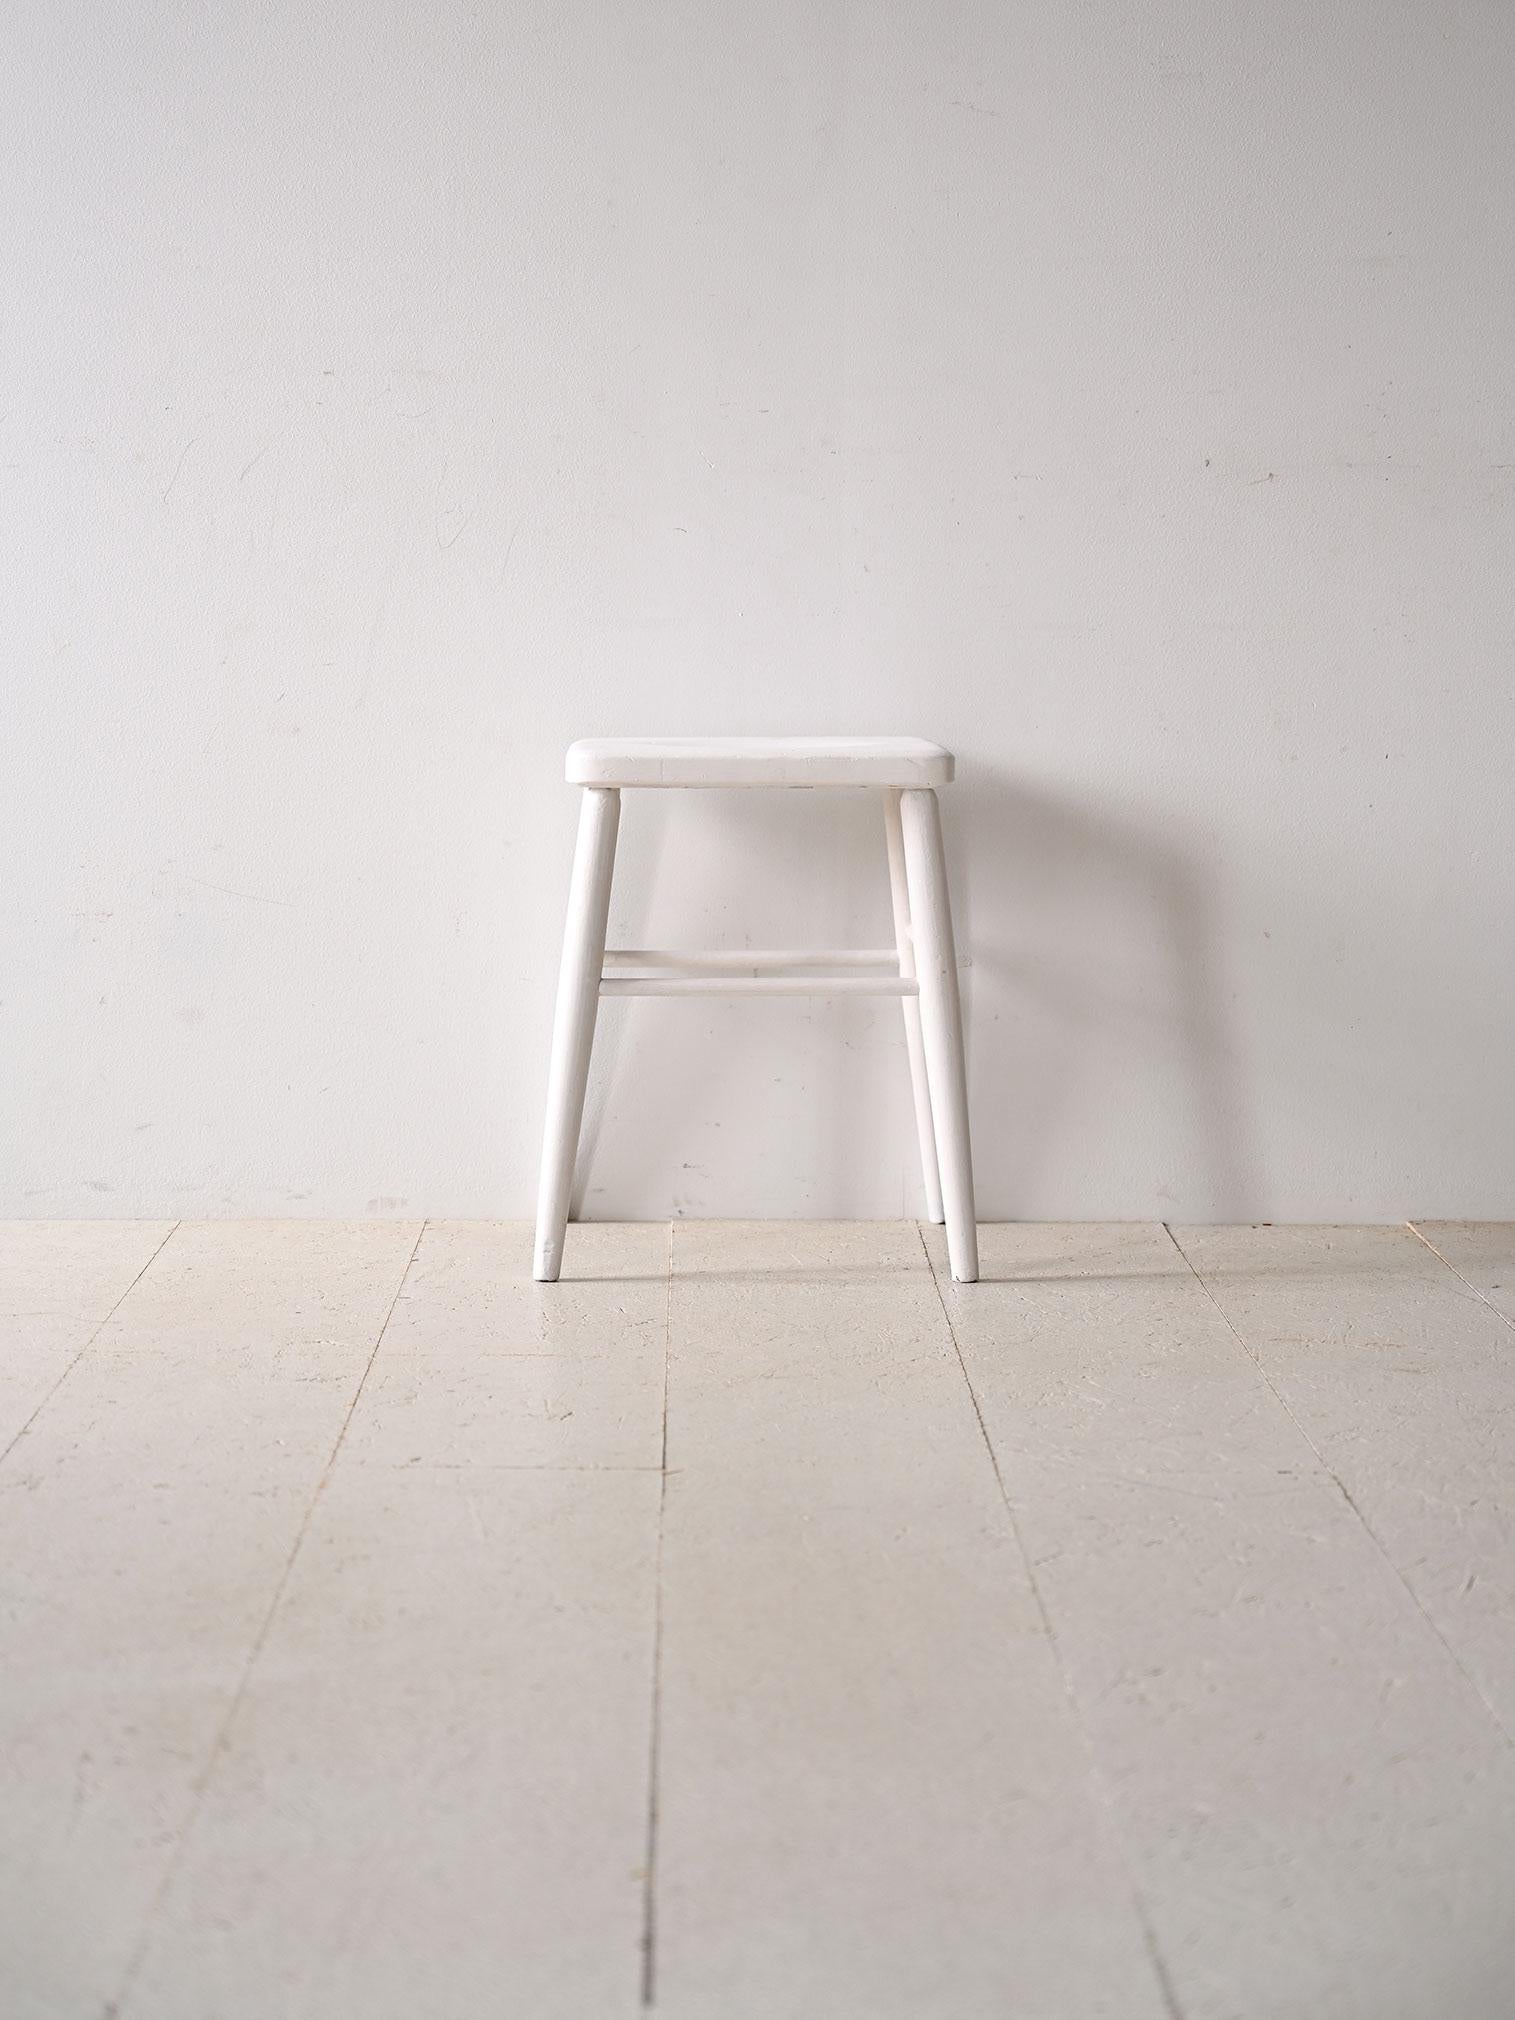 Scandinavian vintage stool painted white.

This wooden seat recalls in its simplicity the essential elements of Nordic design: minimal lines, soft shapes and tapered legs. The white color makes it modern and suitable for inclusion in rooms already